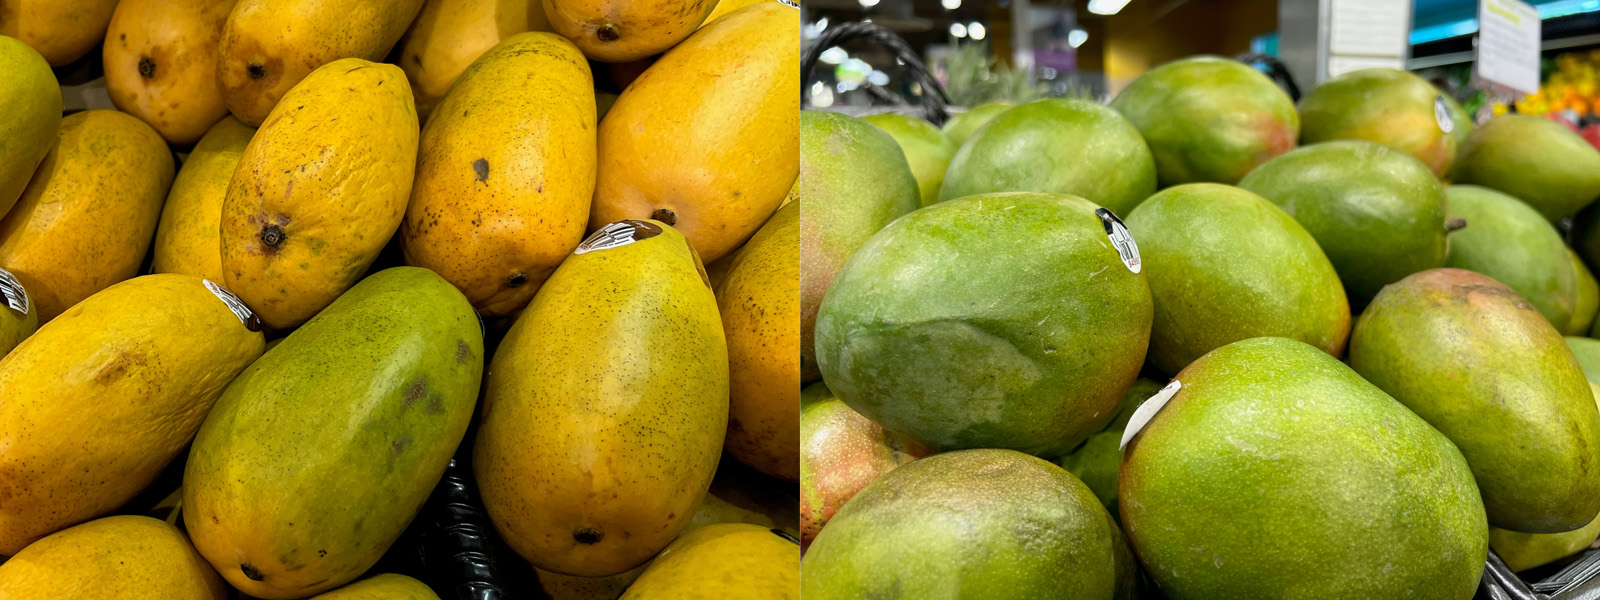 Two photos of different types of mangoes